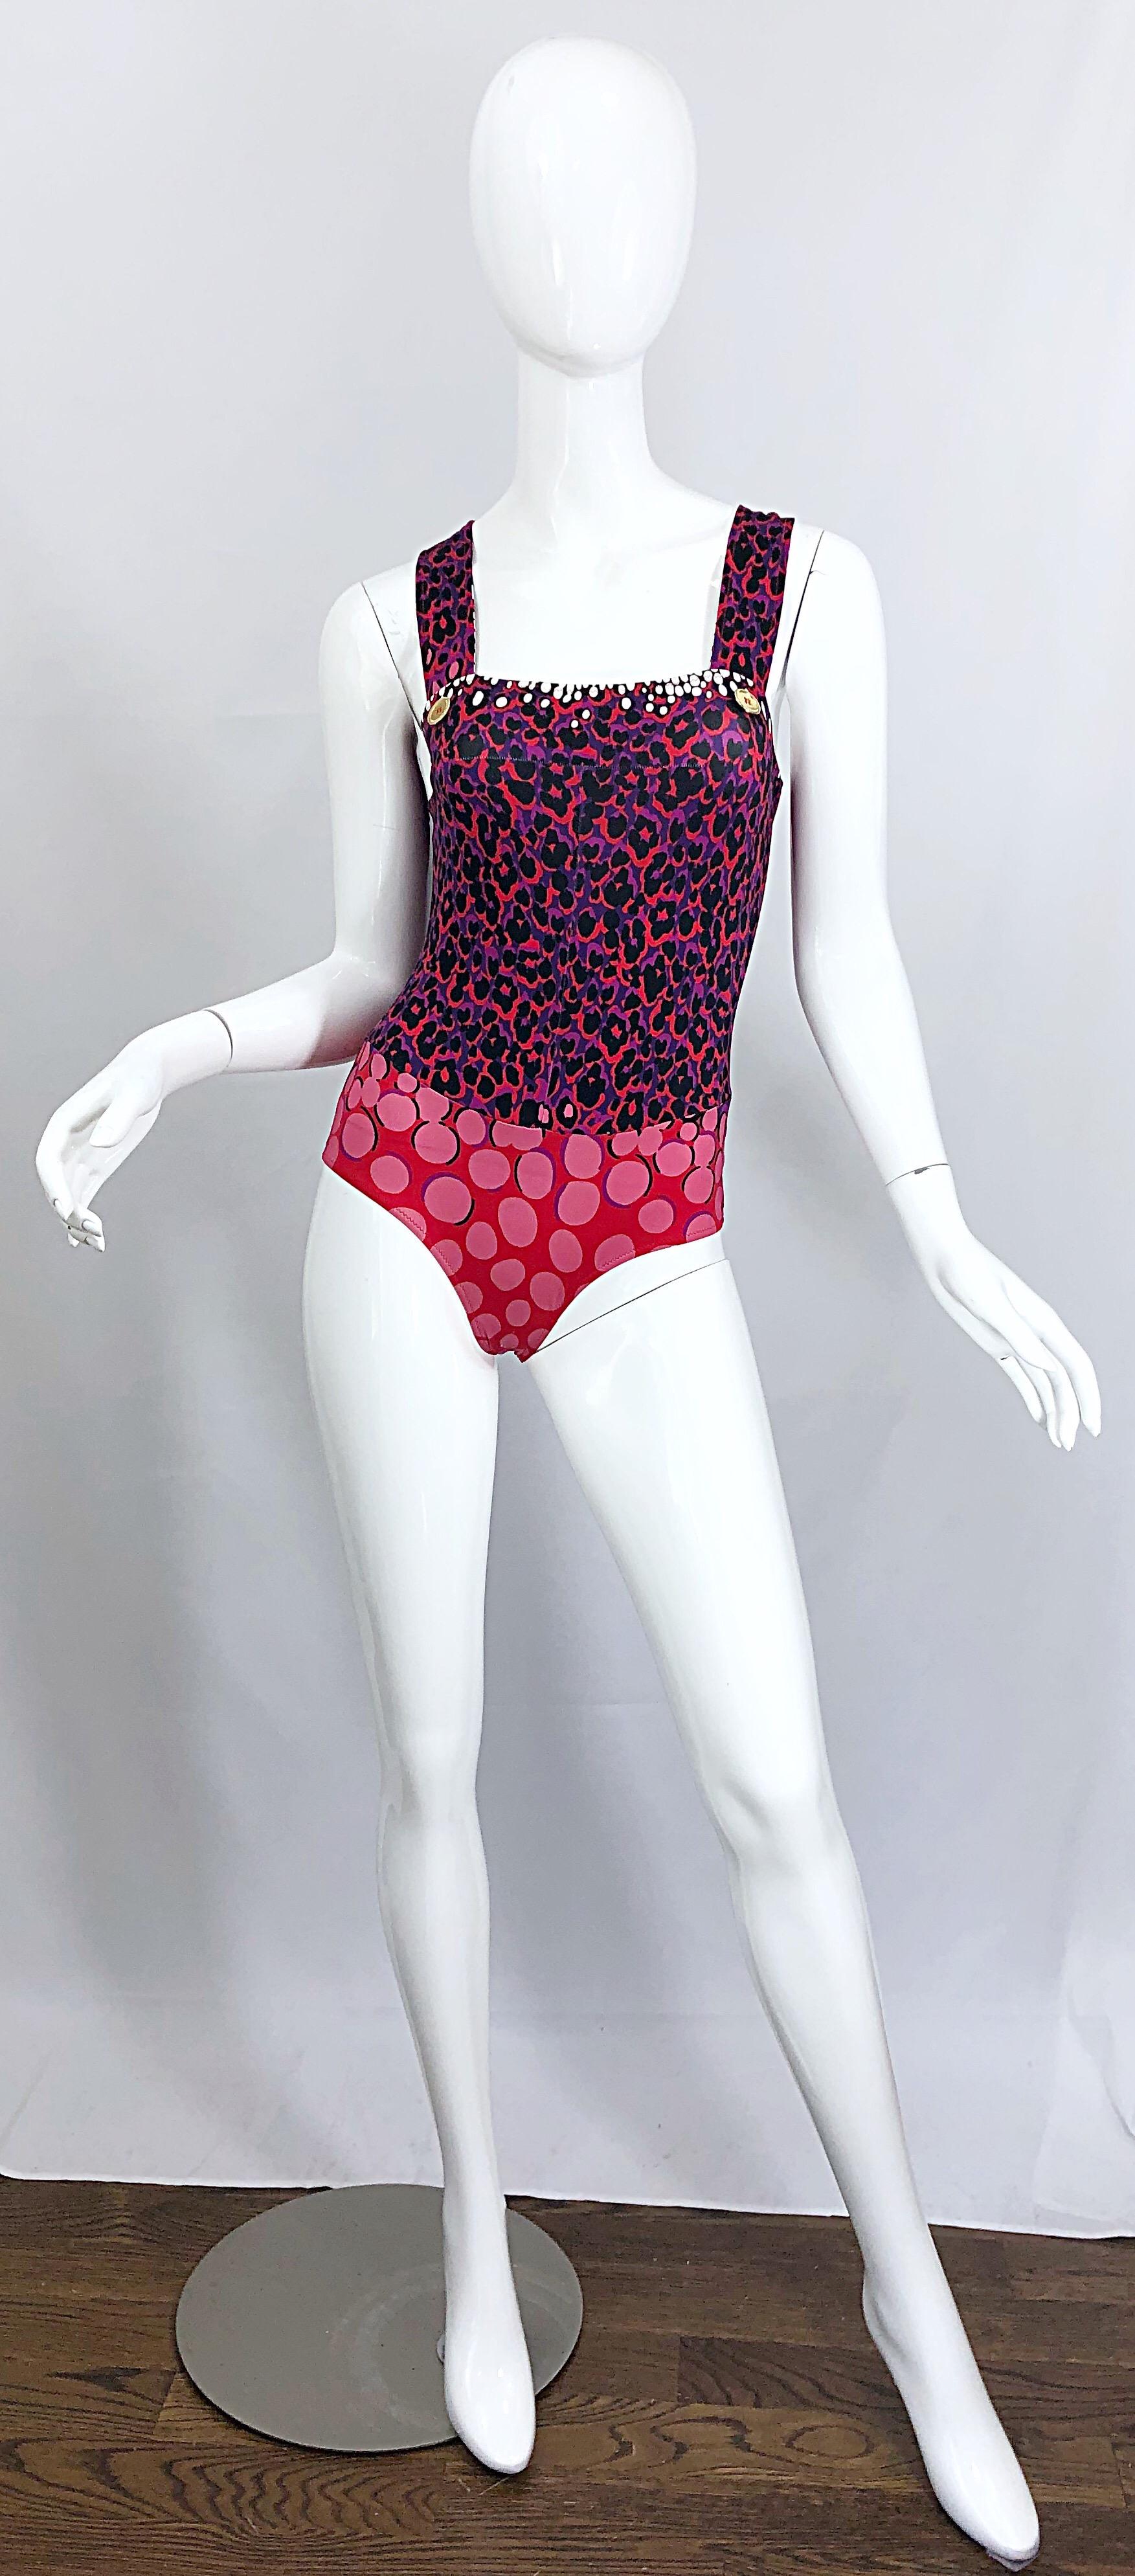 Sexy new YVES SAINT LAURENT purple and red leopard print and polka dot one piece swimsuit or bodysuit! Features a leopard print on the bodice and abstract polka dots on the bottom. Two gold buttons at each strap. Great for the beach, pool, yacht.